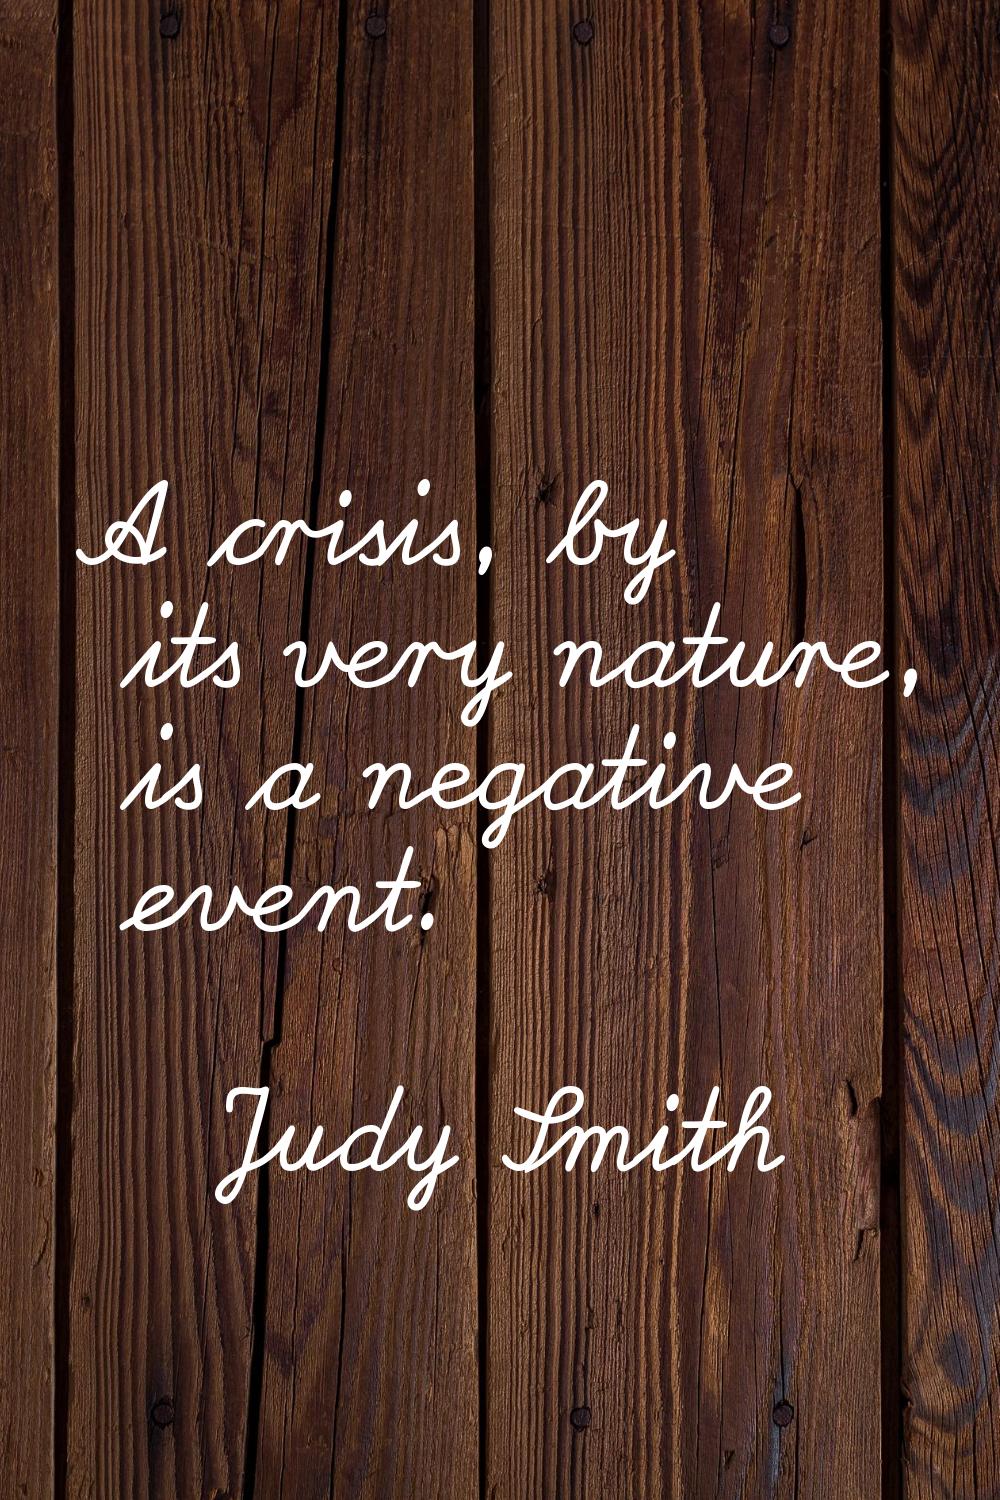 A crisis, by its very nature, is a negative event.